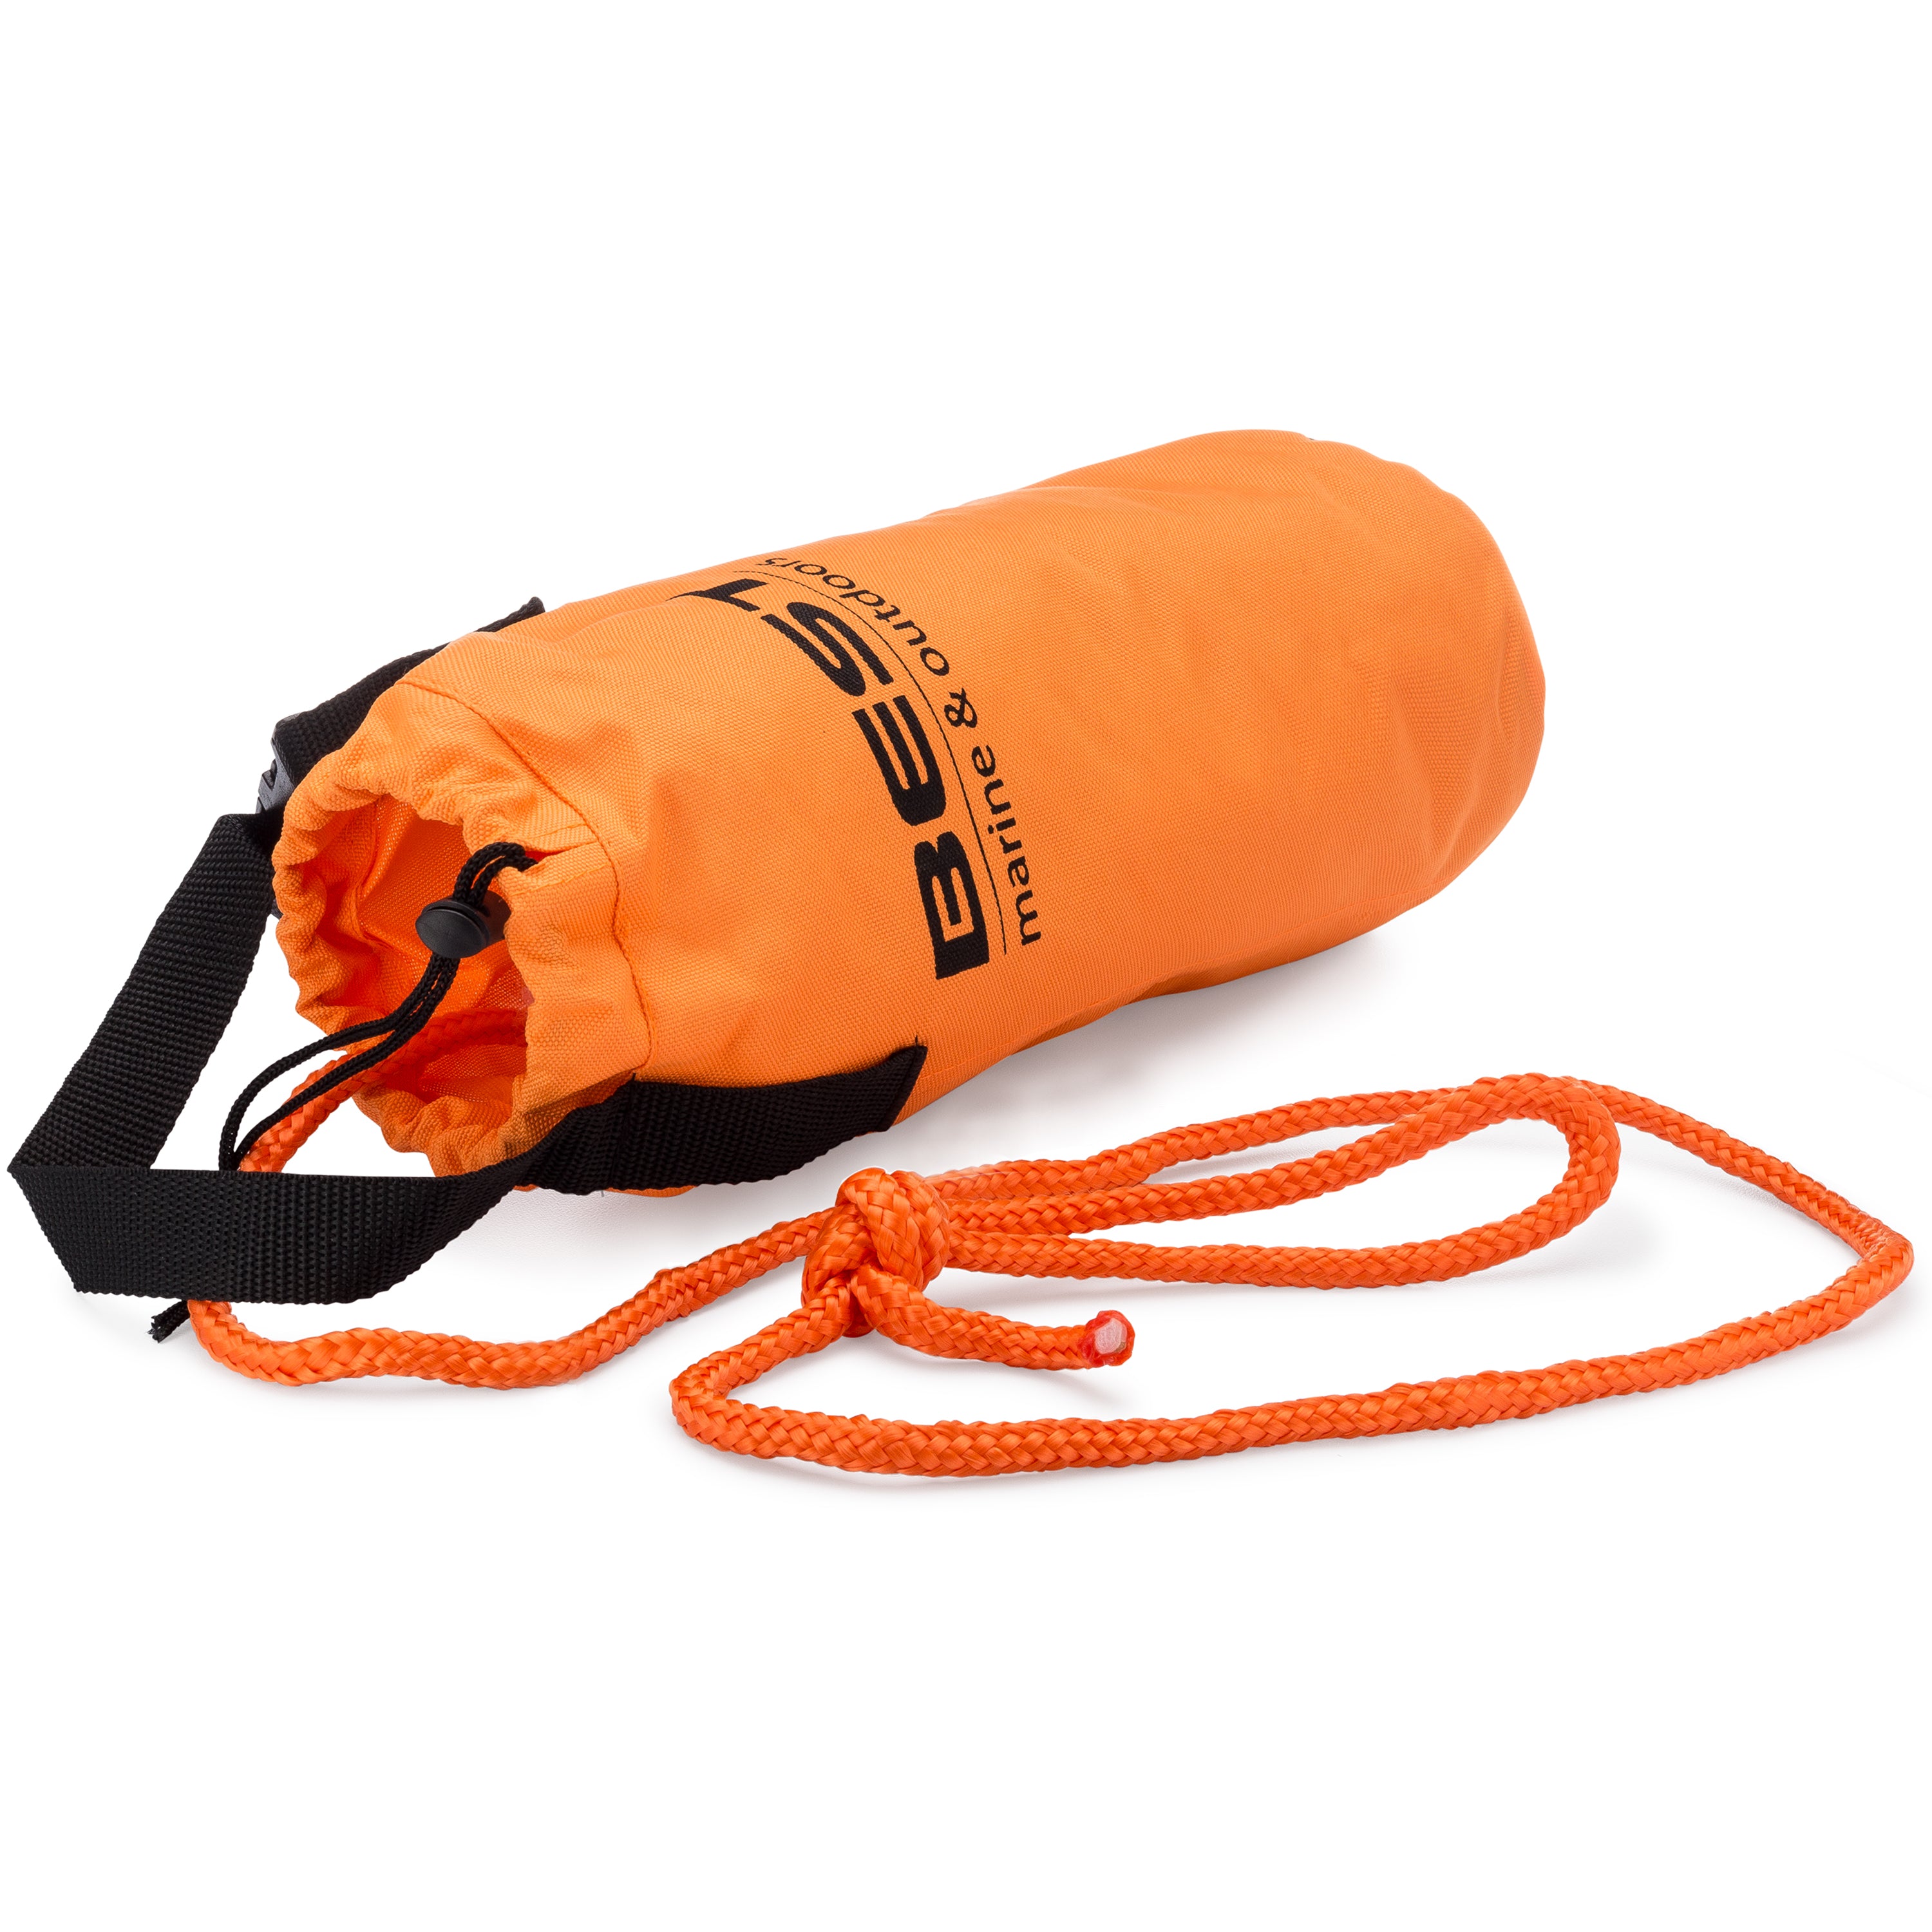 Throw Bag with 52FT Length of Rope, Emergency Rope for Kayaking, Boating,  Fishing, Rafting, High Visibility Safety Equipment